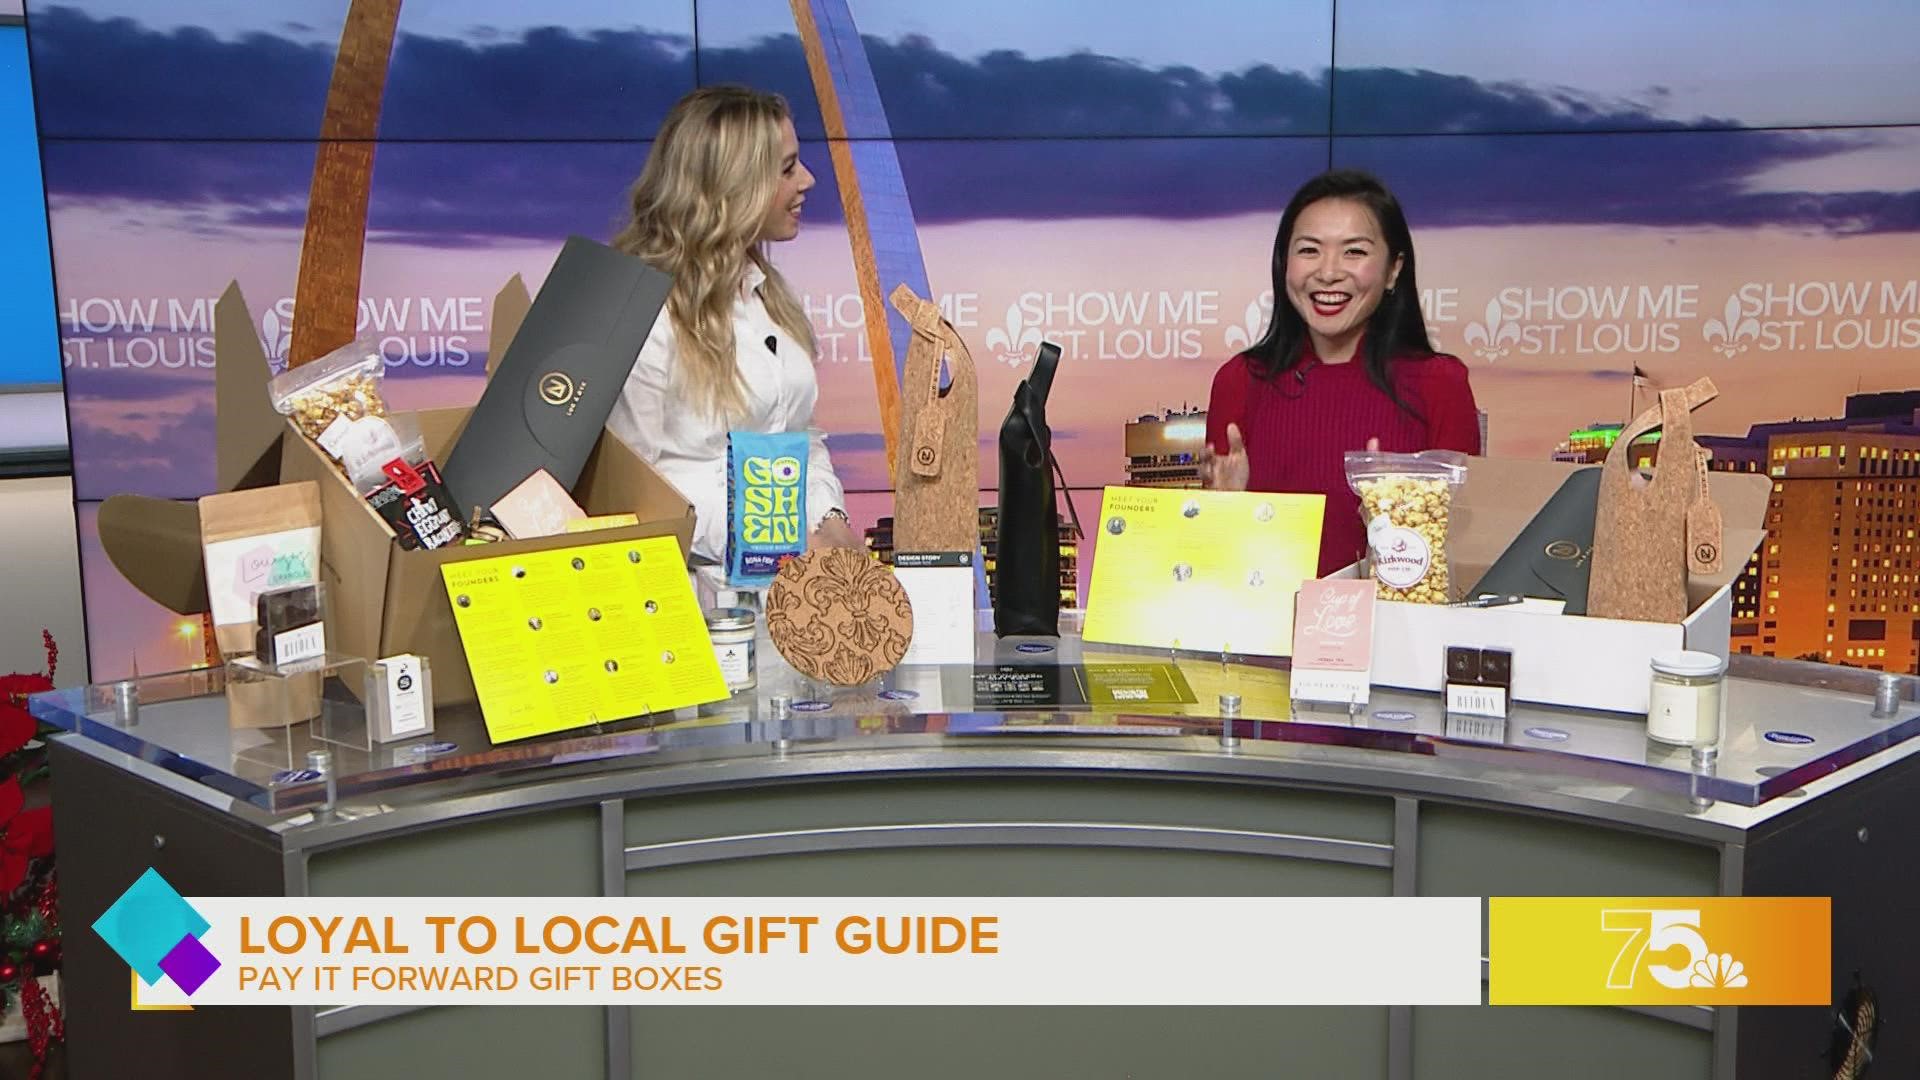 Loyal to Local Gift Guide: Pay it Forward Gift Boxes